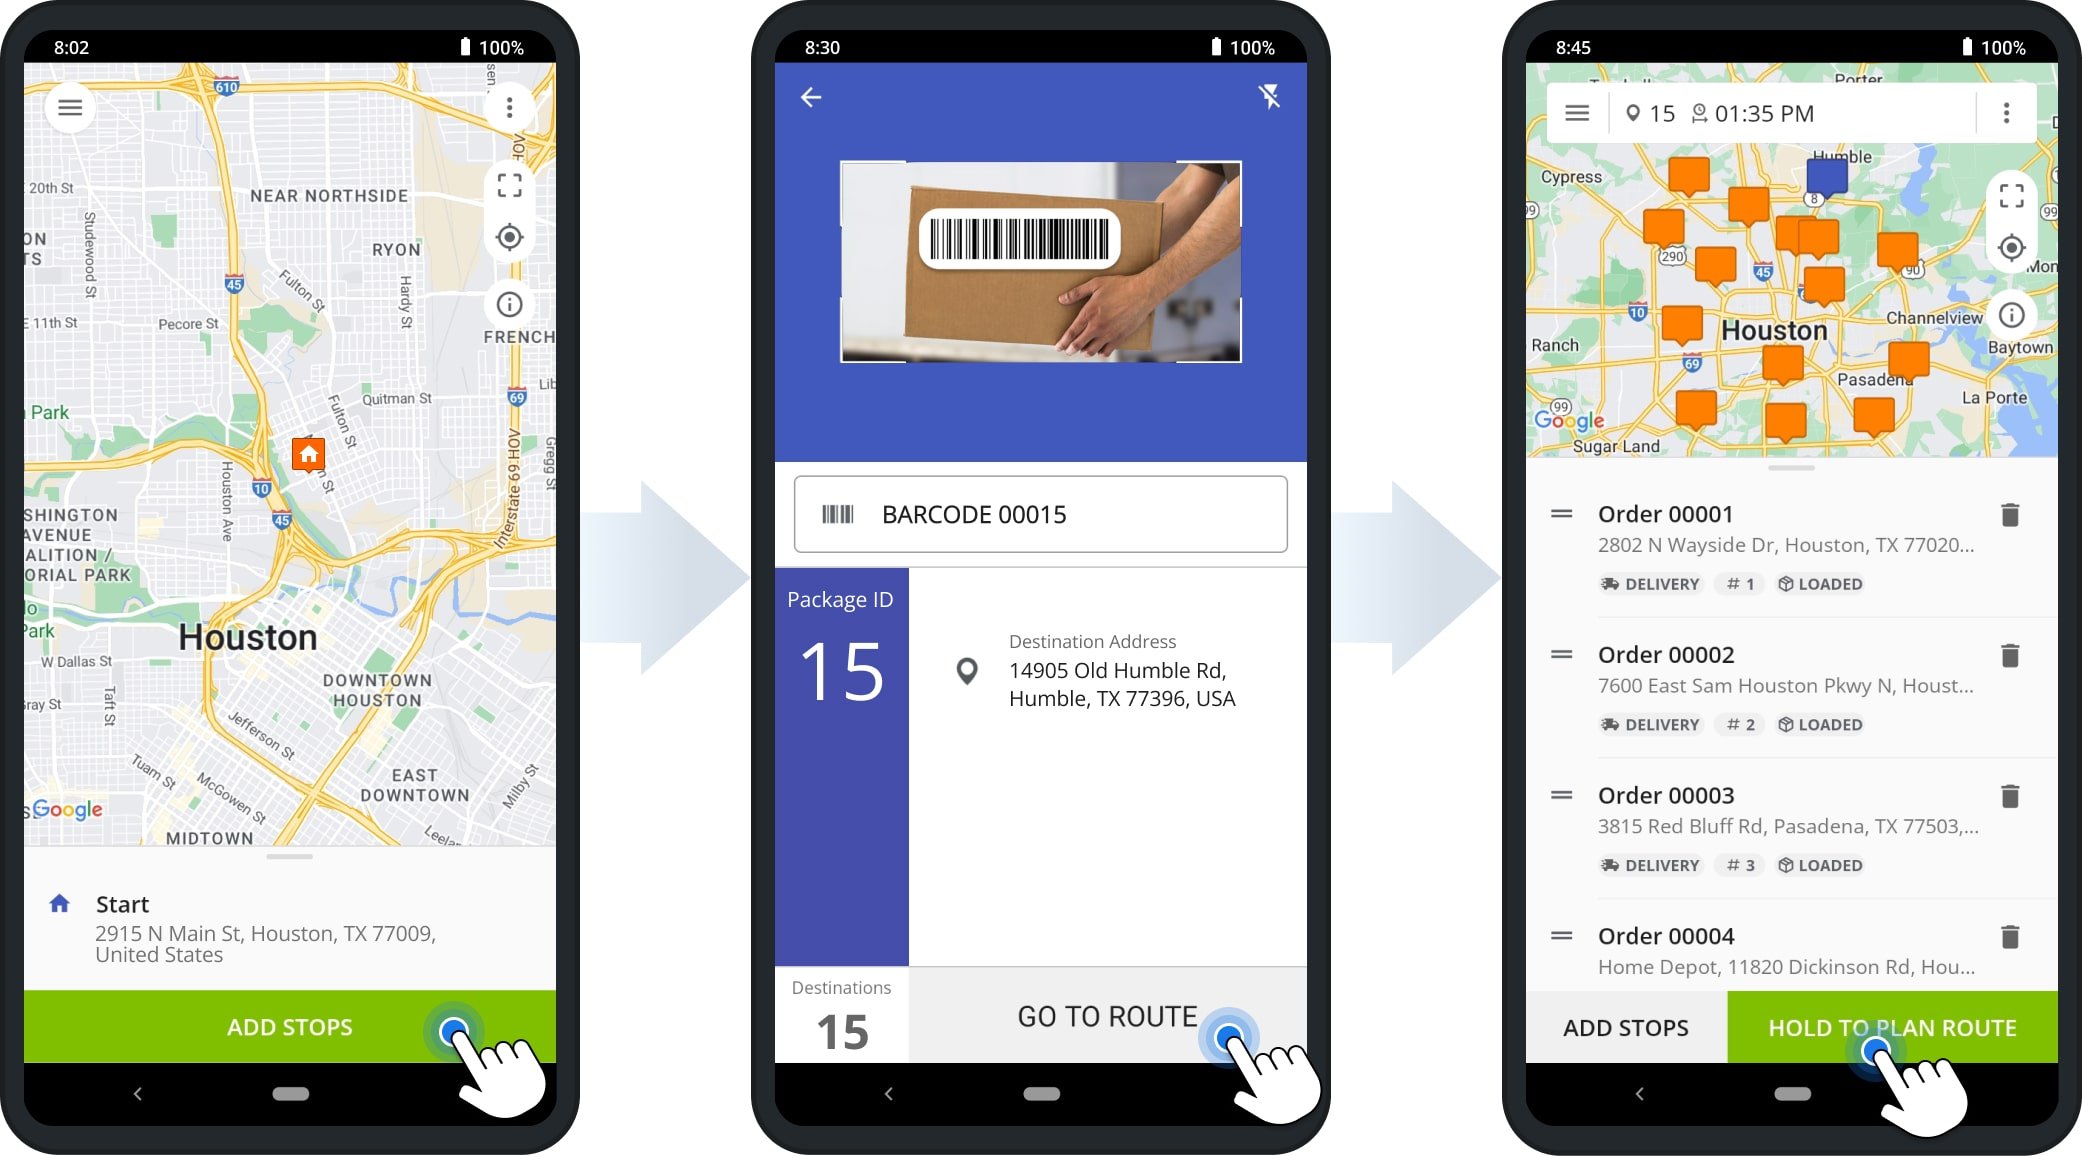 Route4Me's Grab & Go feature enables drivers to scan order label barcodes to plan customer order routes.